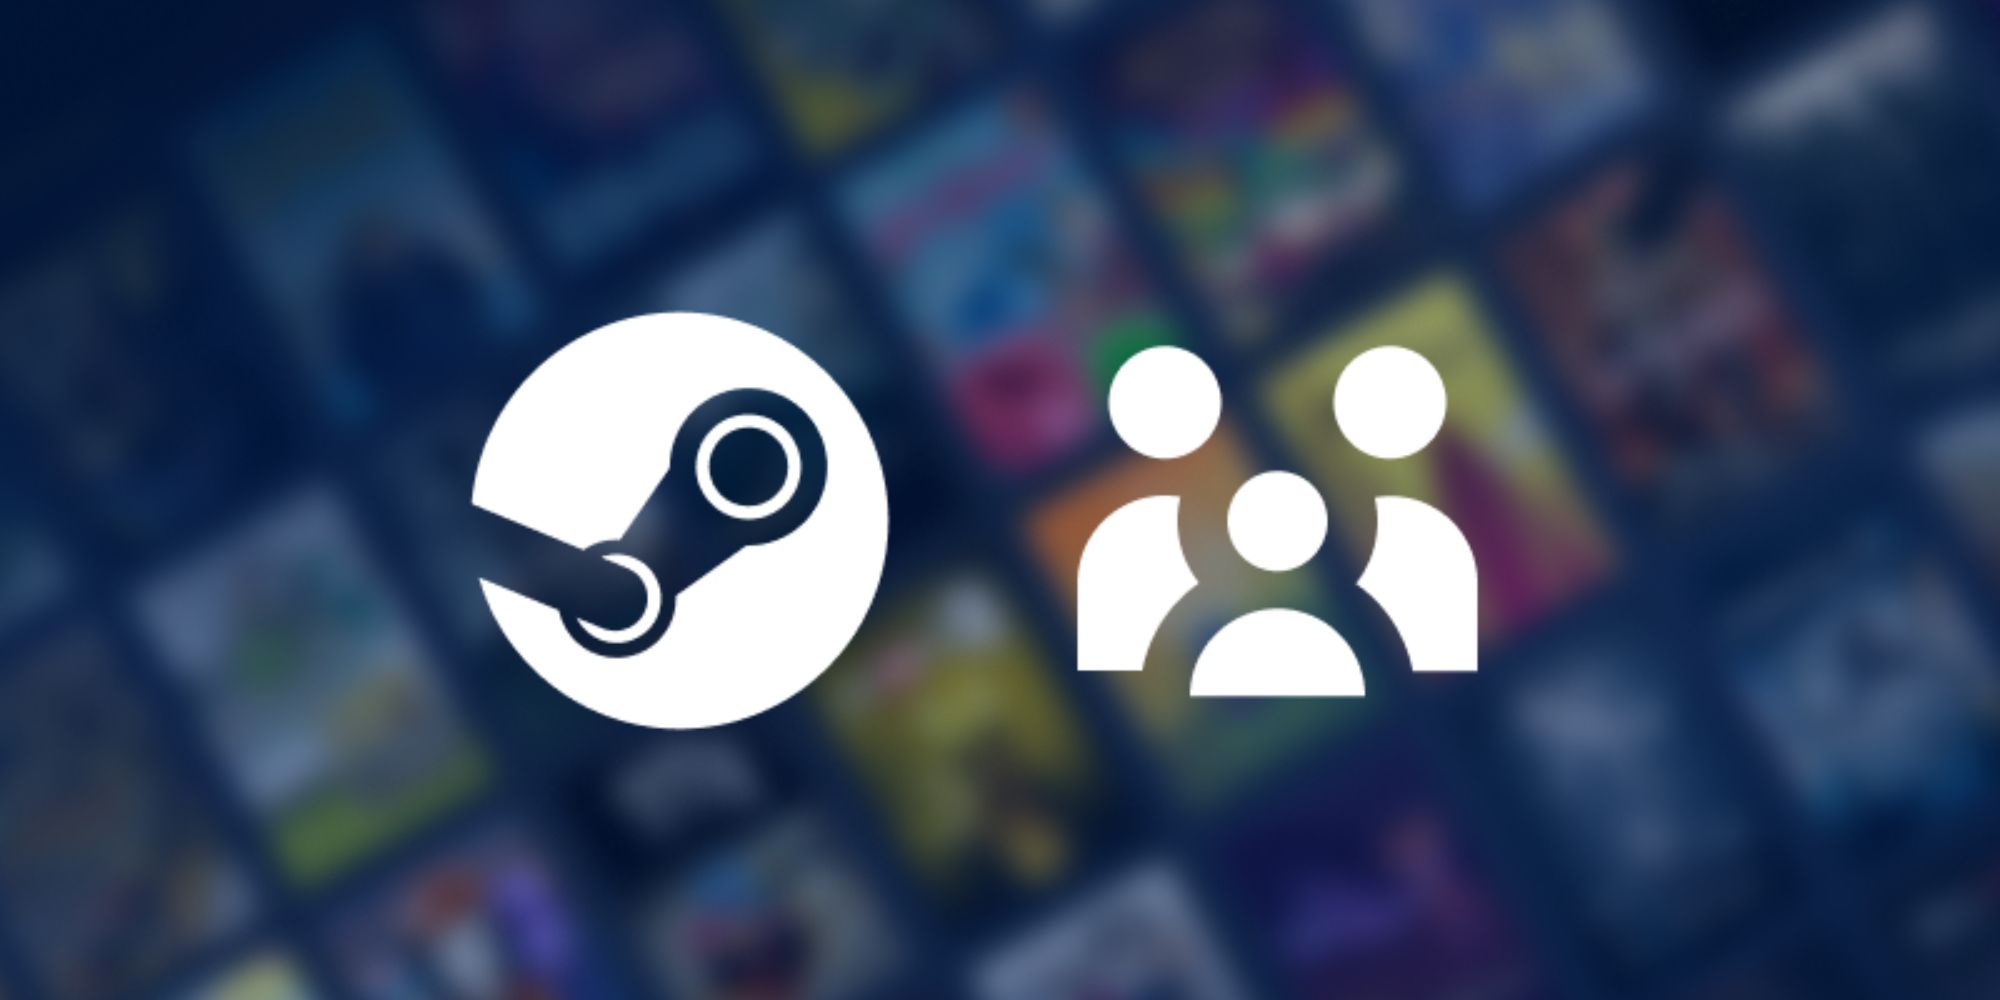 An image of the new Steam Family feature, which allows you to share games with your family members and friends.